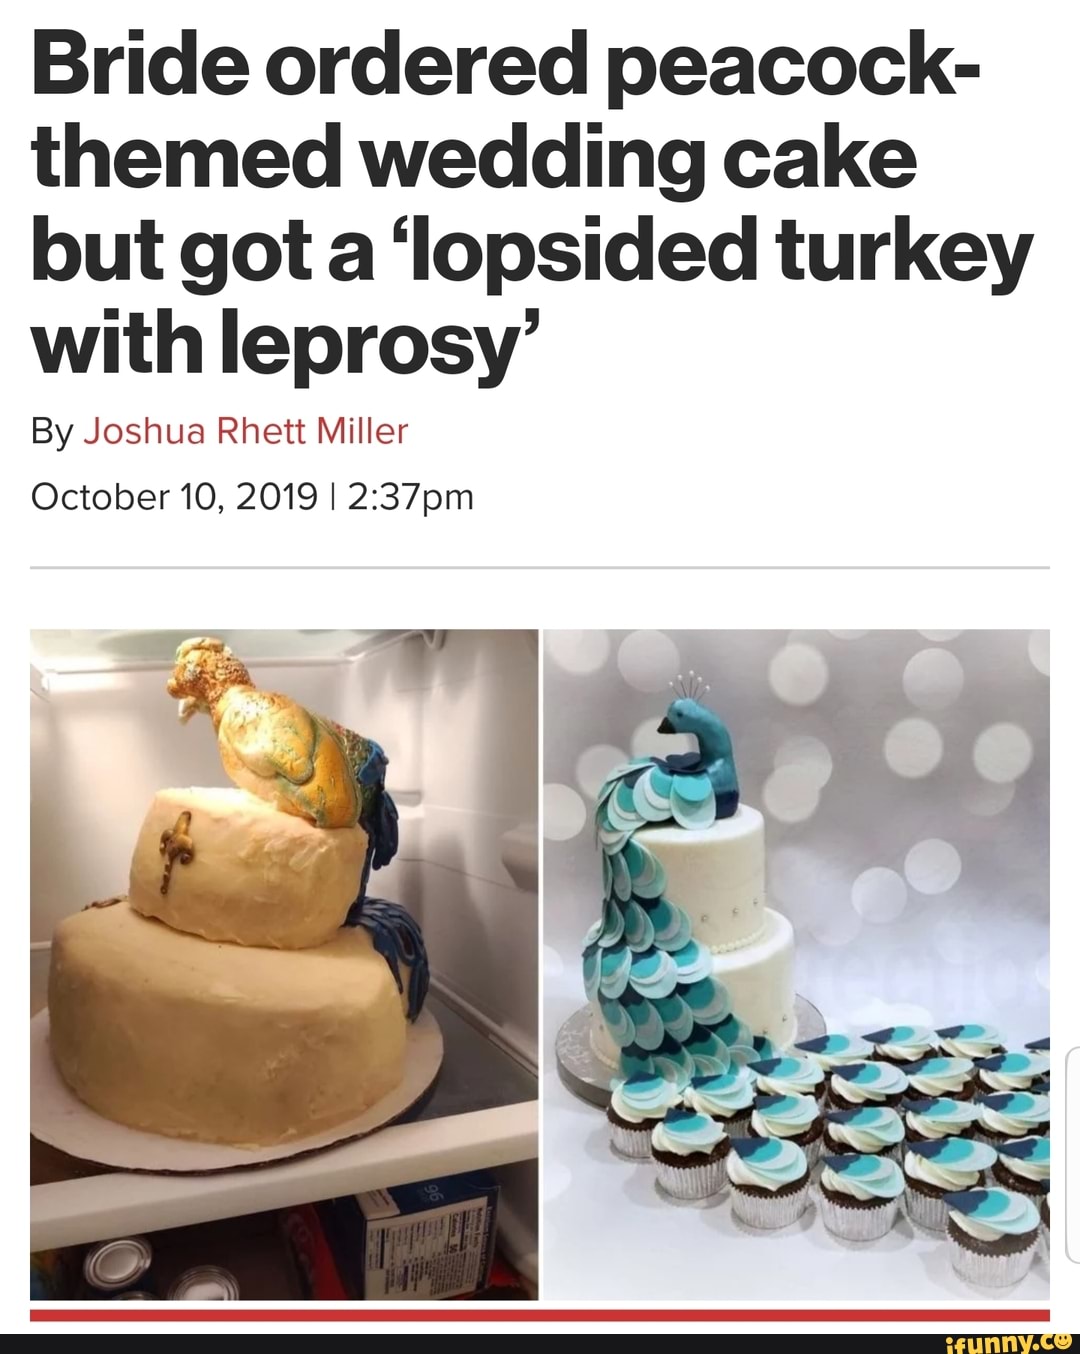 Top 10 Peacock Wedding Cakes - HubPages